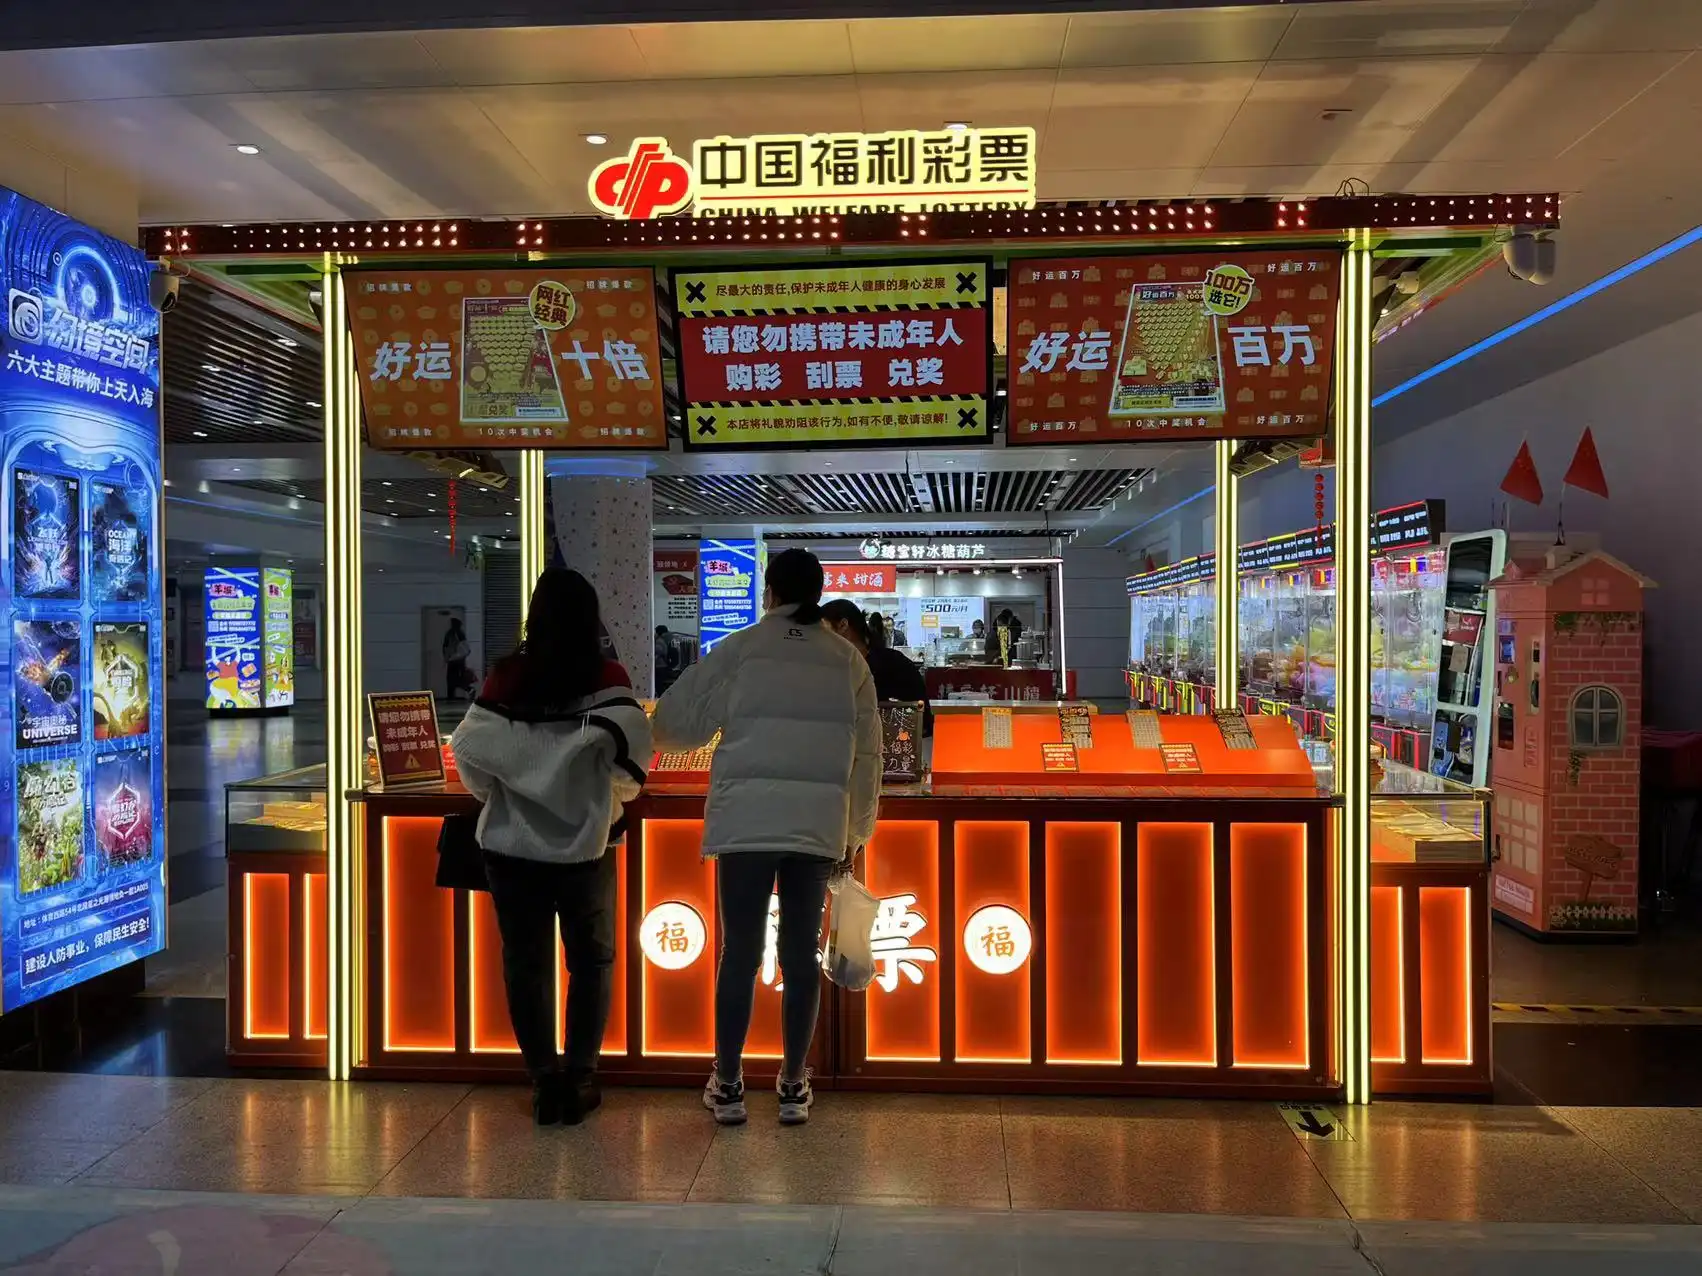 China bans highly addictive lotteries in recent regulatory shift